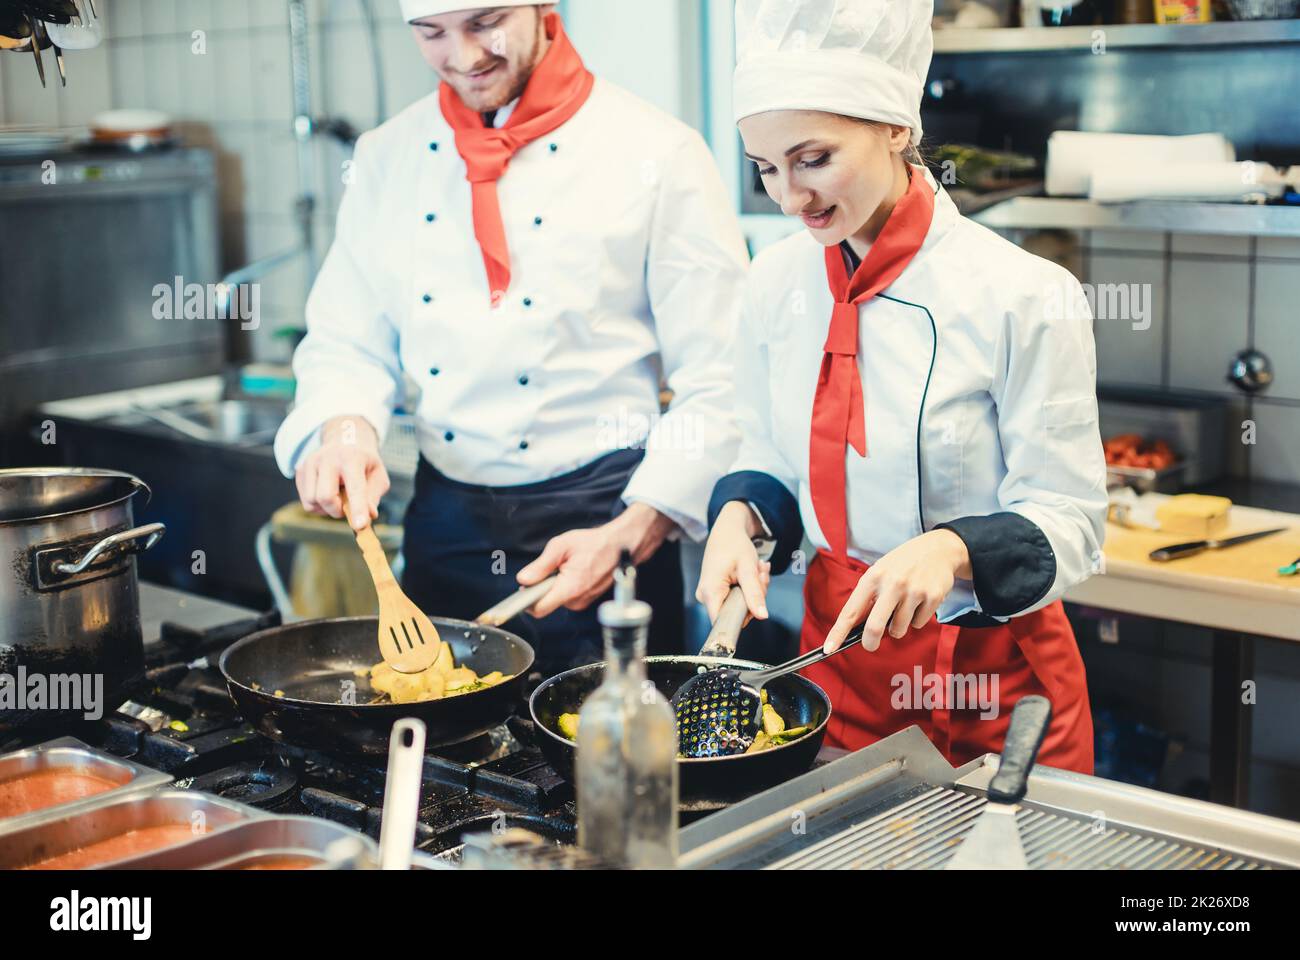 Team of chefs in a kitchen preparing fantastic food in pans Stock Photo